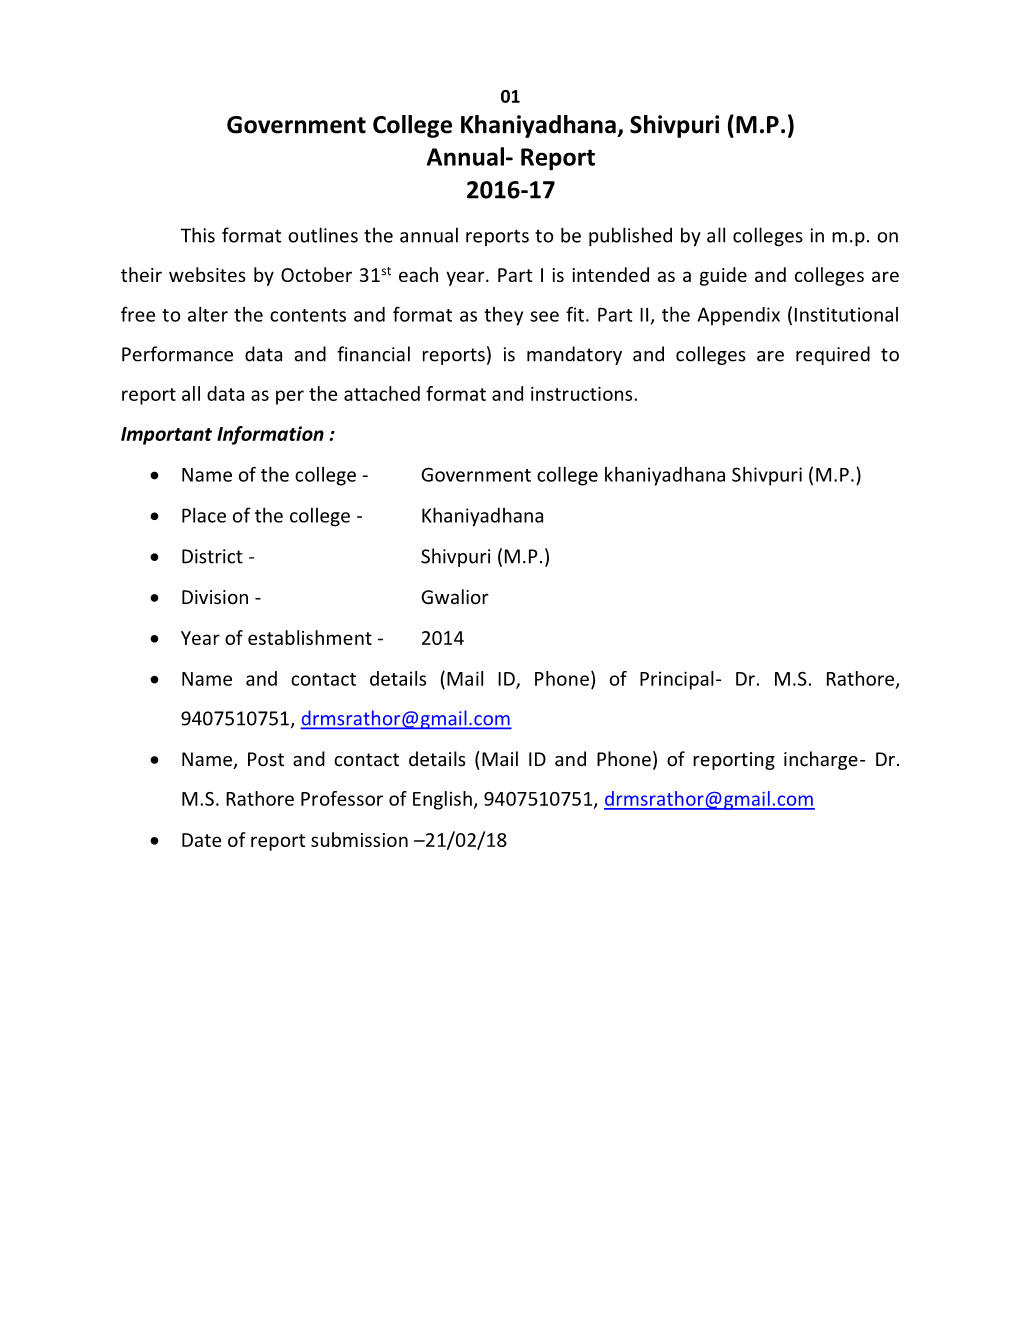 Government College Khaniyadhana, Shivpuri (M.P.) Annual- Report 2016-17 This Format Outlines the Annual Reports to Be Published by All Colleges in M.P